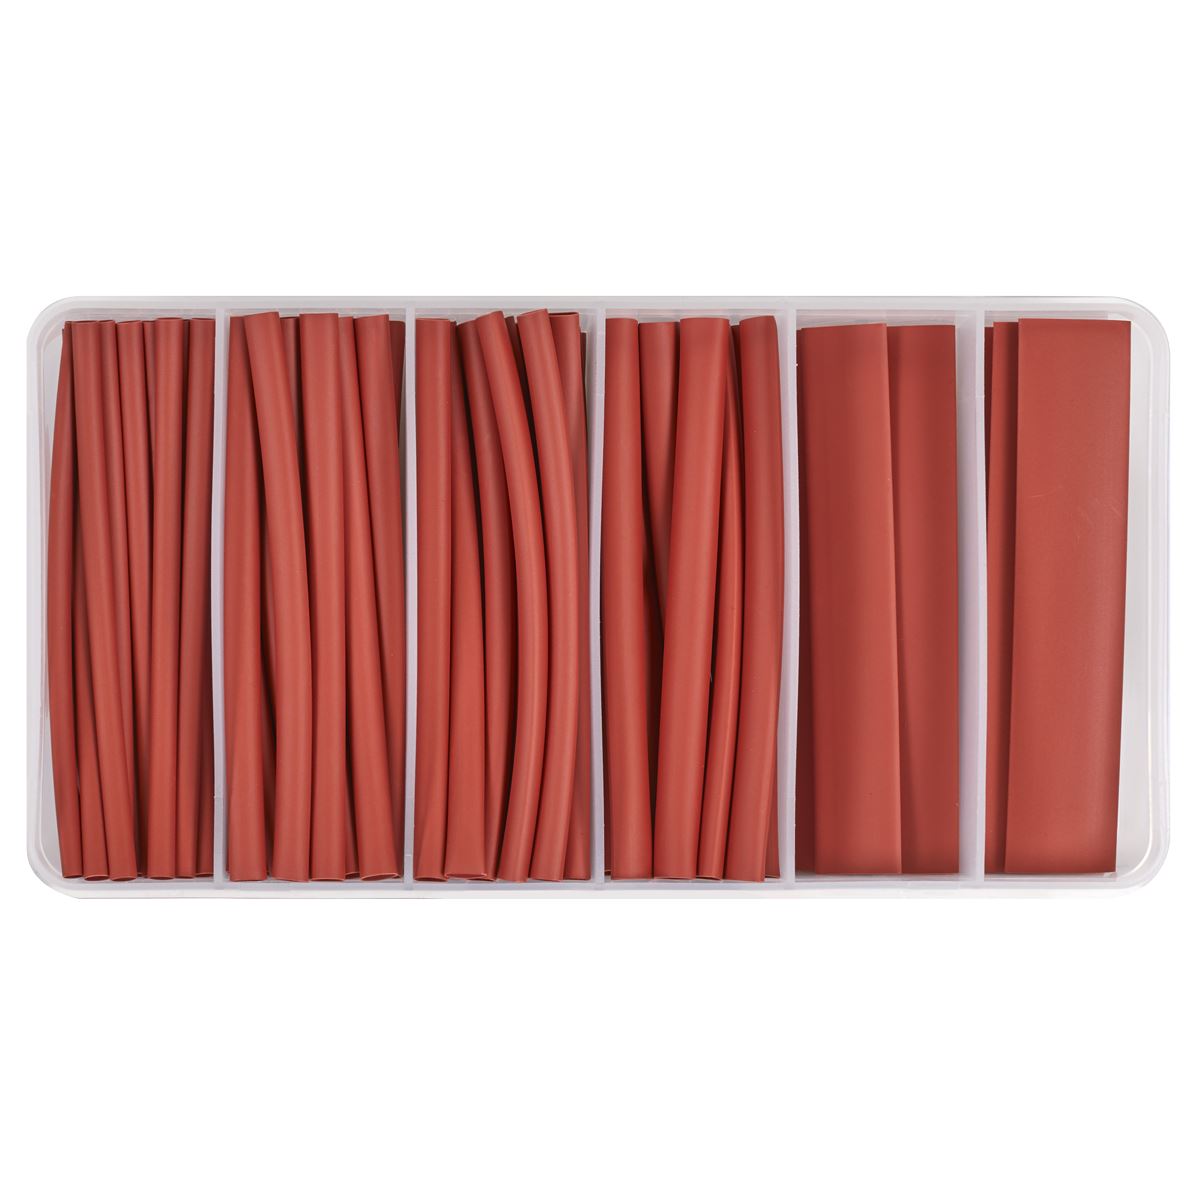 Sealey Heat Shrink Tubing Assortment 95pc 100mm Red